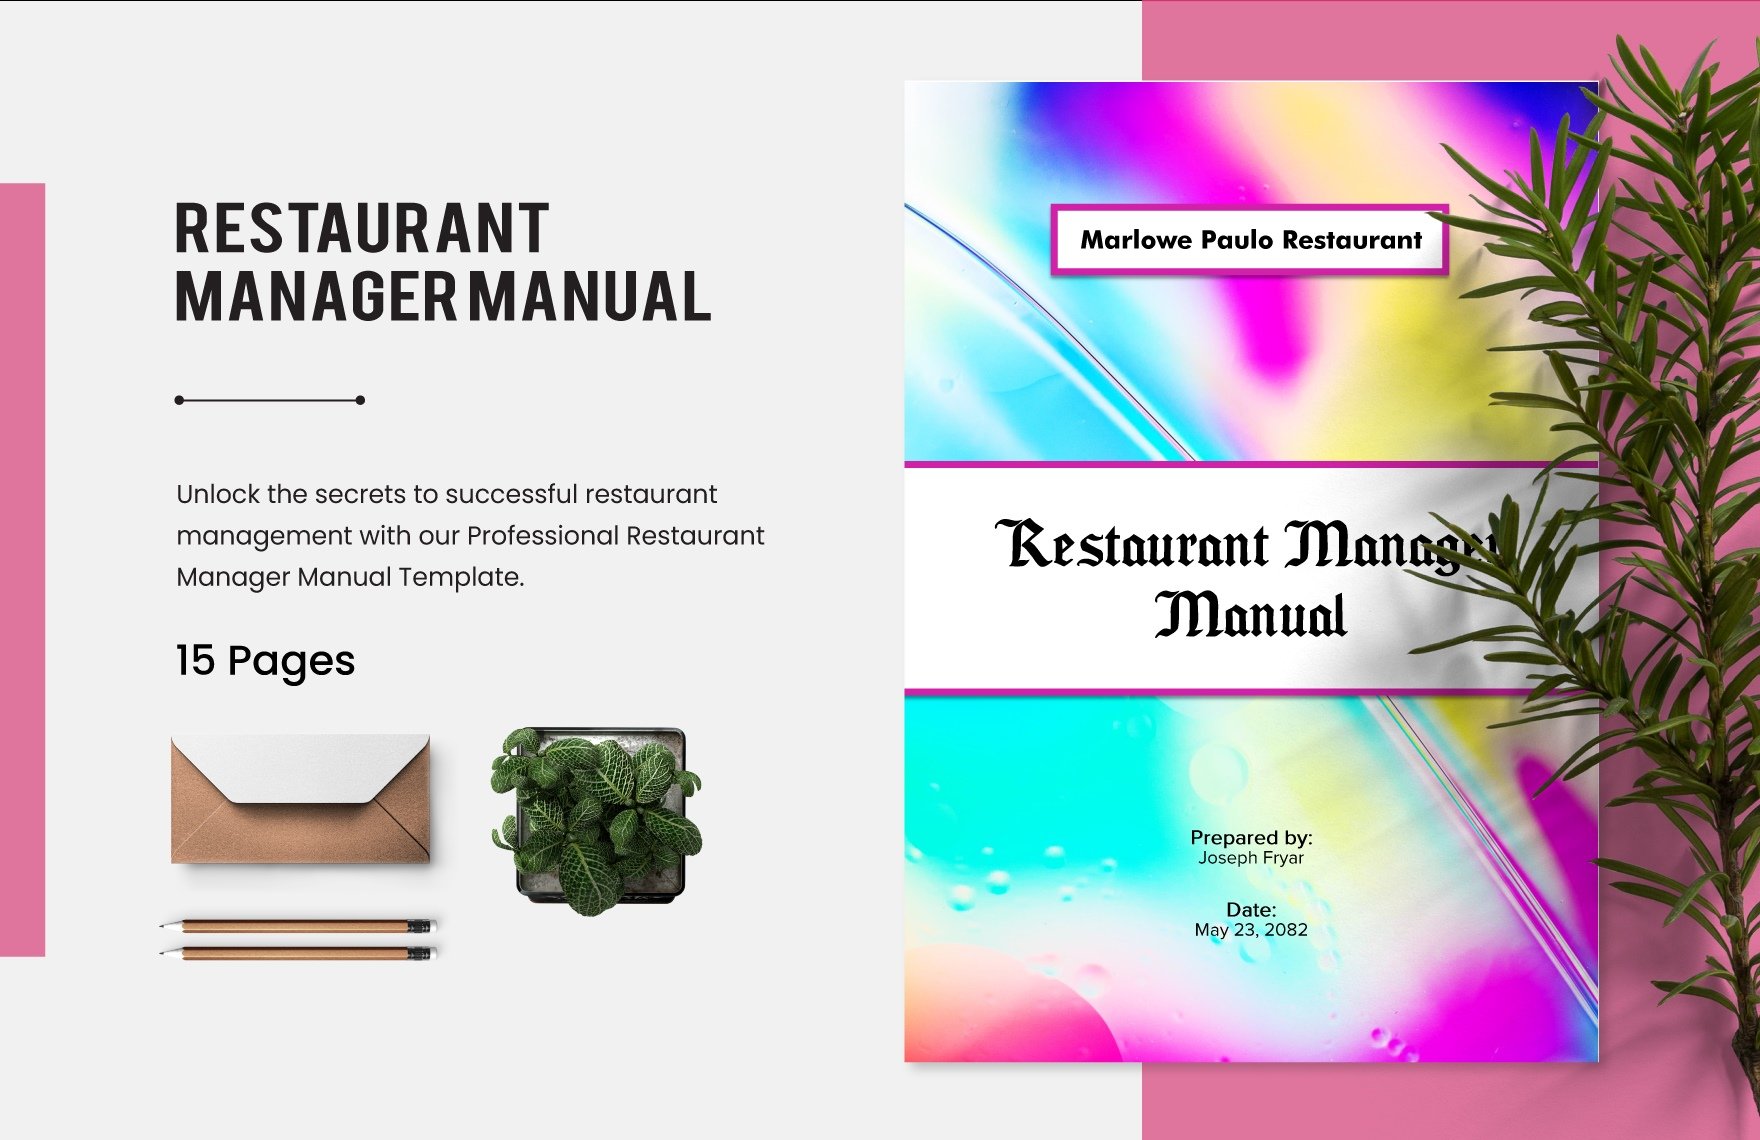 Restaurant Manager Manual Template